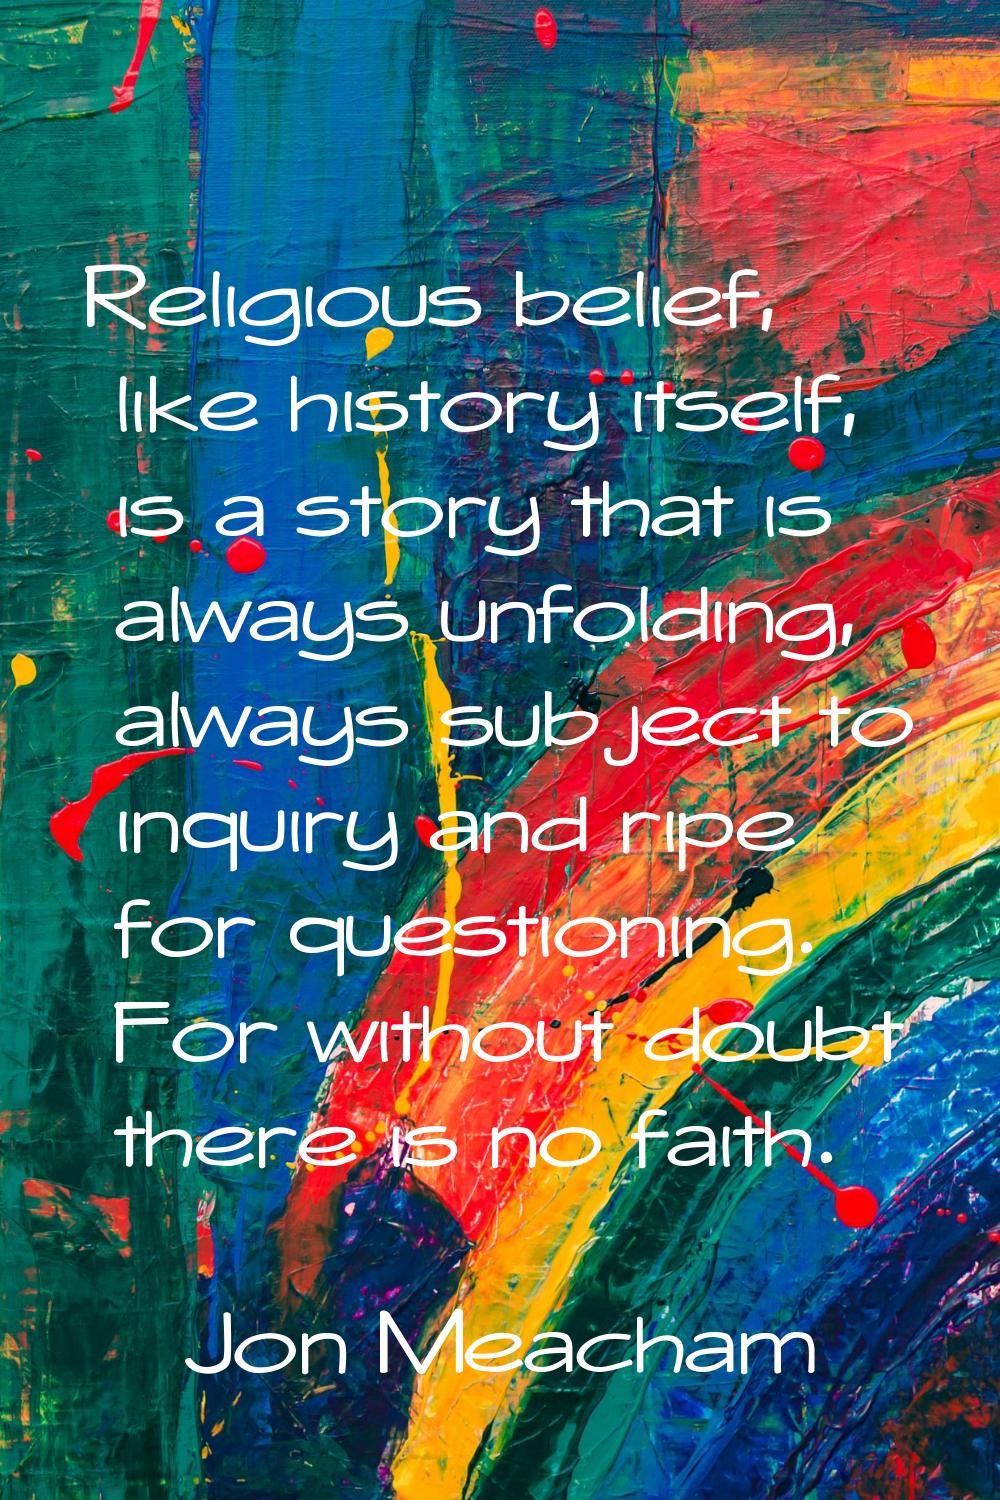 Religious belief, like history itself, is a story that is always unfolding, always subject to inqui